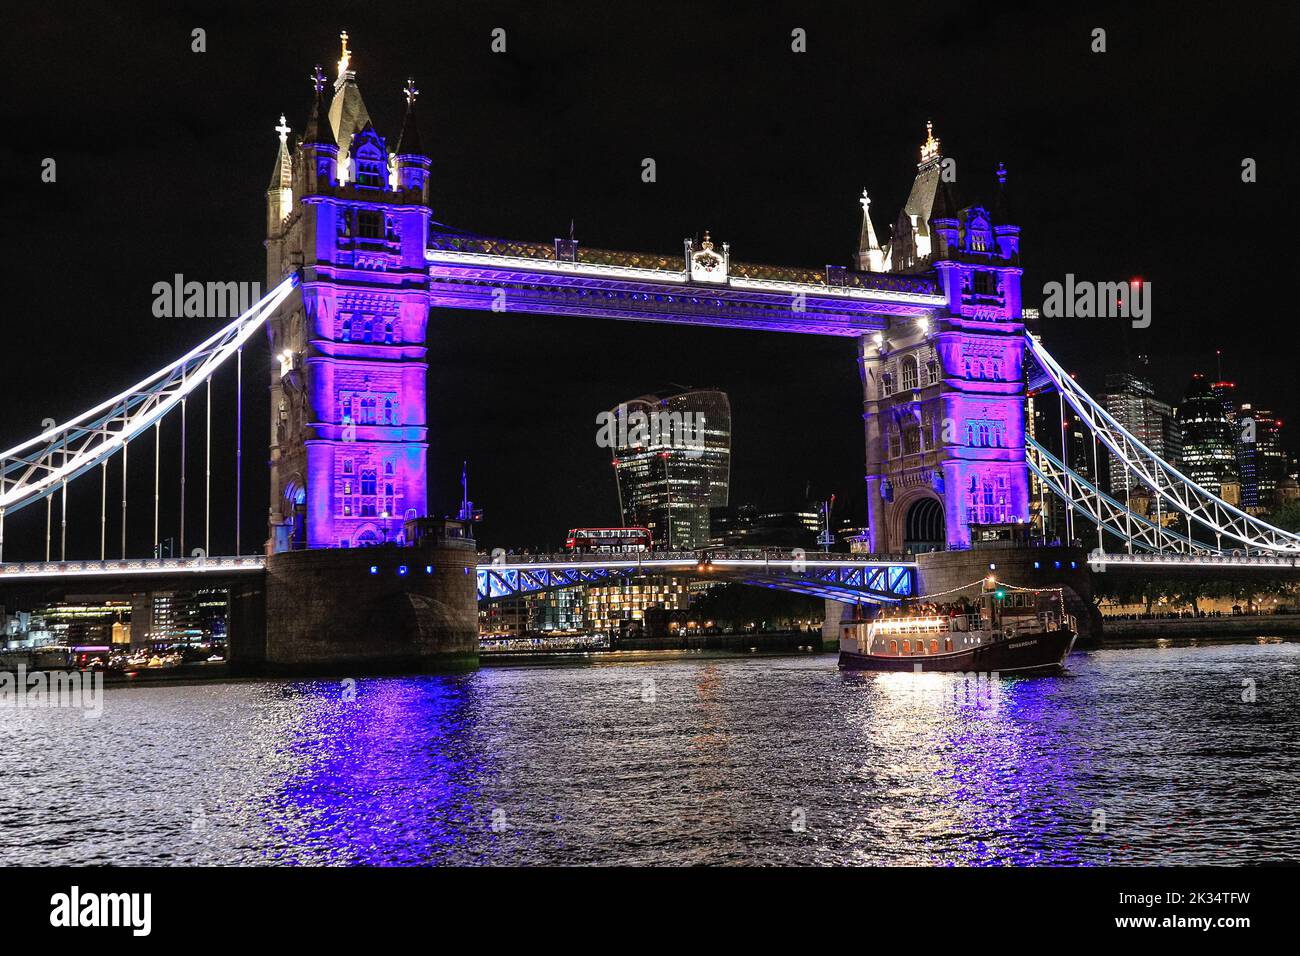 London, UK, 24th Sep 2022. The flotilla reaches Tower Bridge, illuminated in purple as a tribute to the Queen. Reflections, a night-time flotilla, on the River Thames in London, marks the passing of Her Majesty the Queen and the accession of King Charles III. Part of Totally Thames, the illuminated flotilla travels from Chelsea Bridge to Tower Bridge, with the Queen's row barge Gloriana, as its centrepiece. Credit: Imageplotter/Alamy Live News Stock Photo